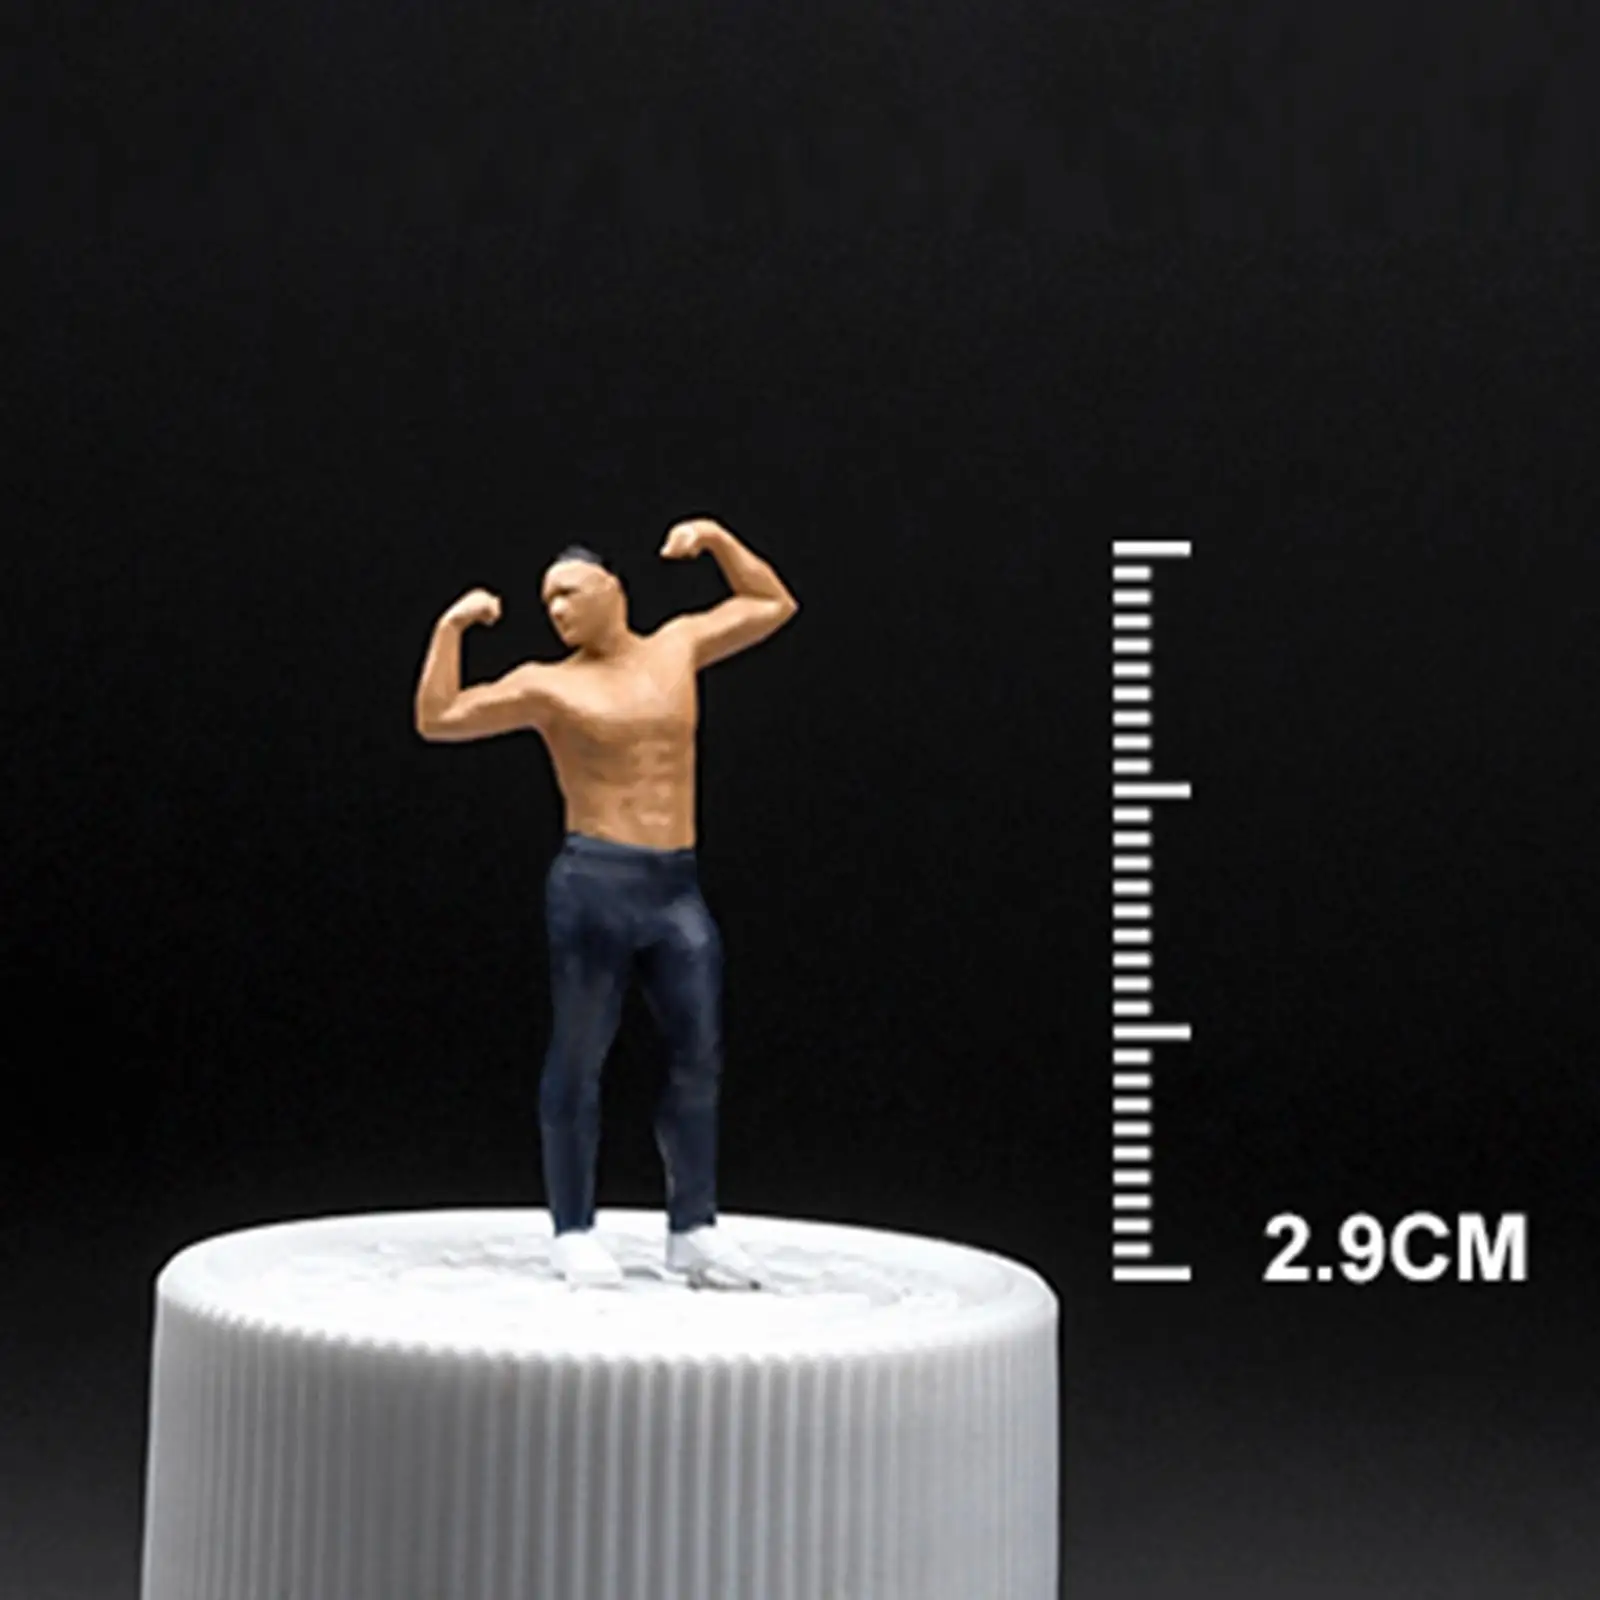 1/64 Mini Ornaments Miniature Figurines Model Realistic Shape for Home Decoration Waterproof Multifunctional for Bodybuilder